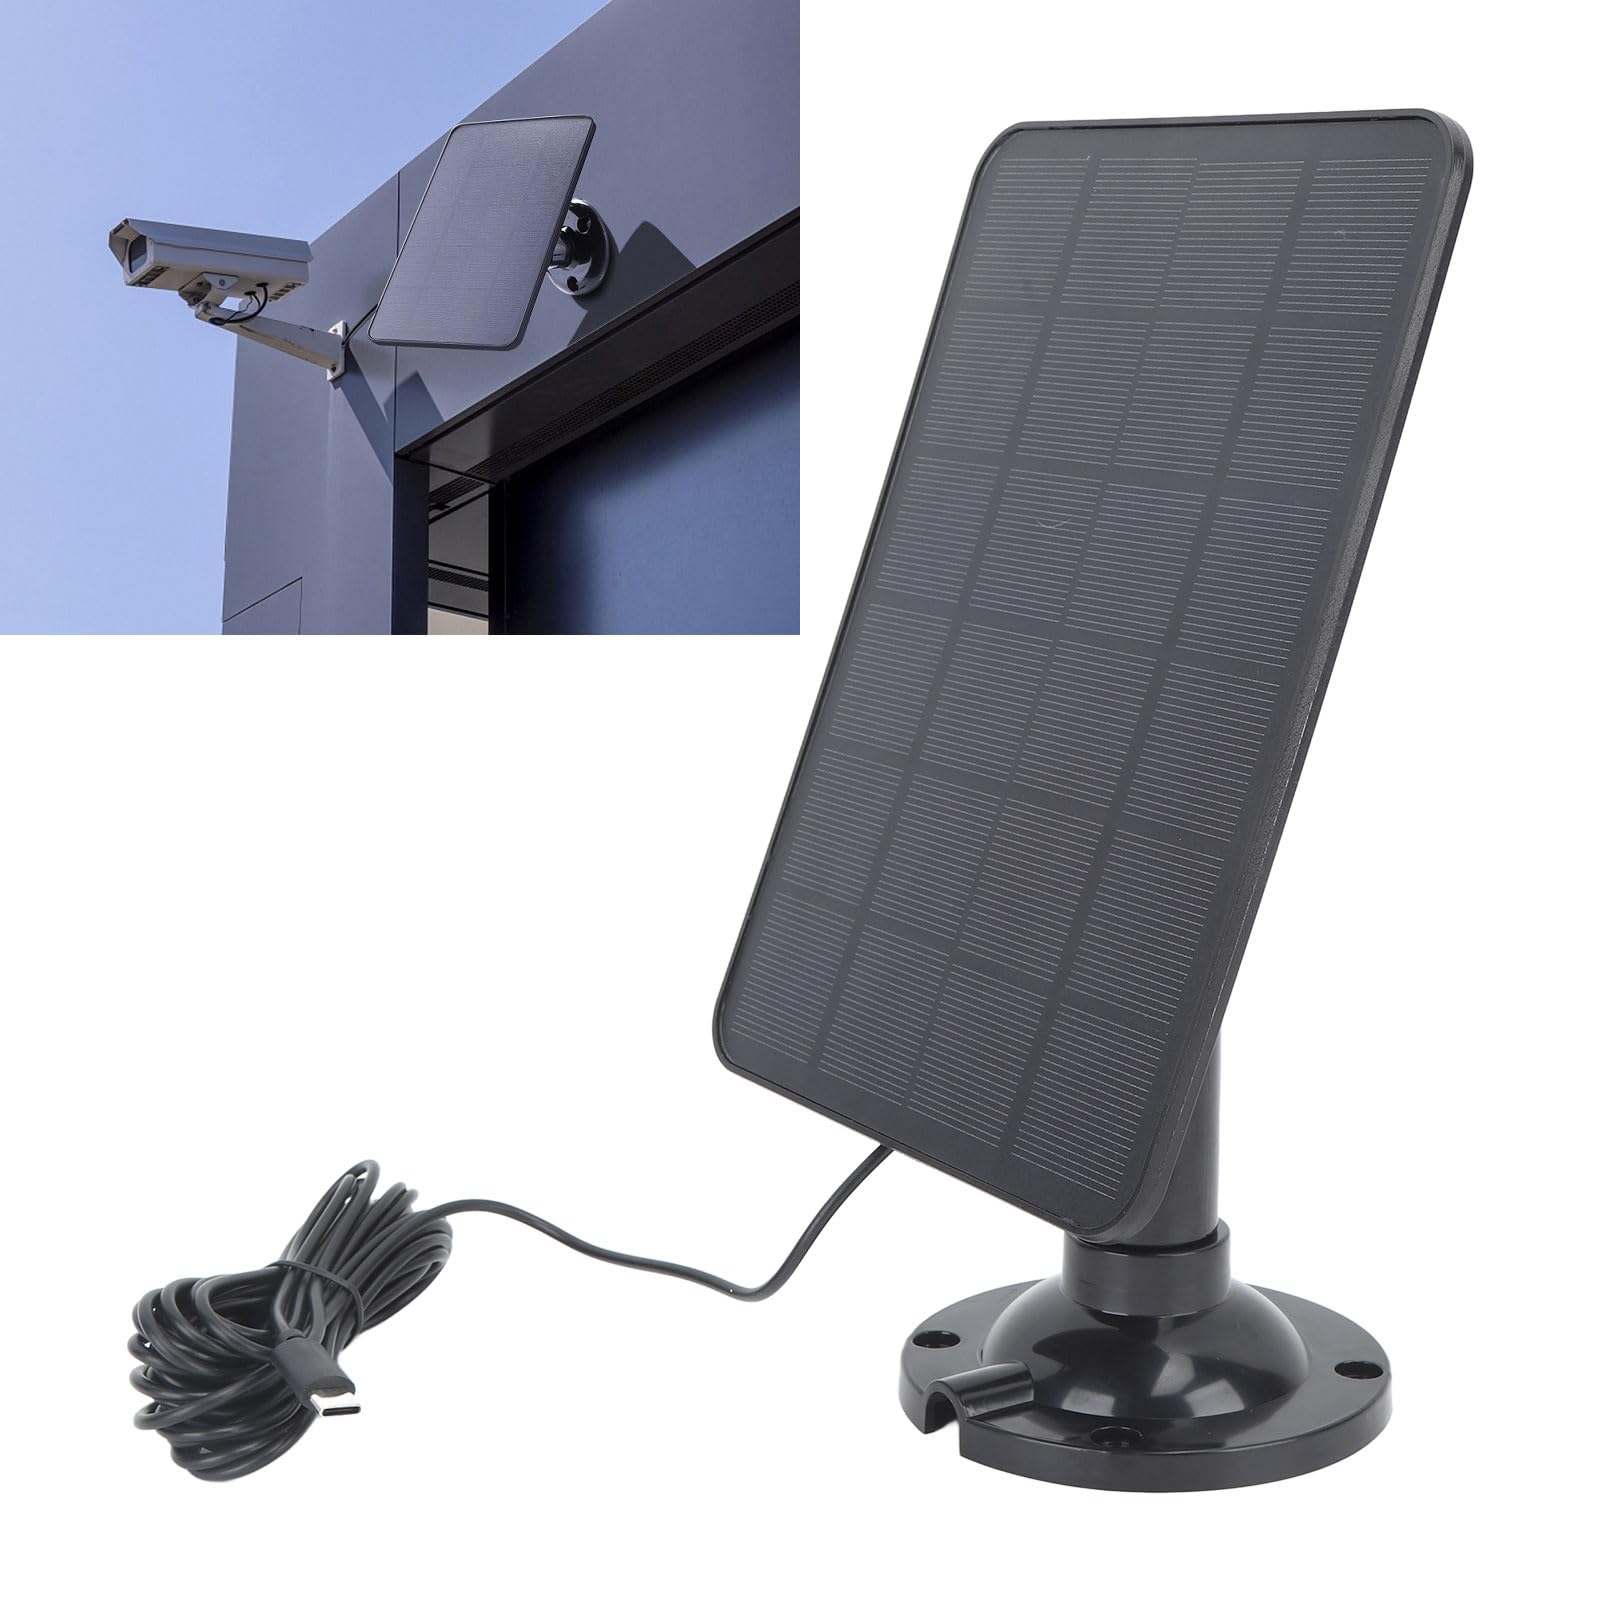 Solar Panel, High Temperature Resistant 10W 5V Type C Interface Solar Panel Charger Black for Surveillance Camera